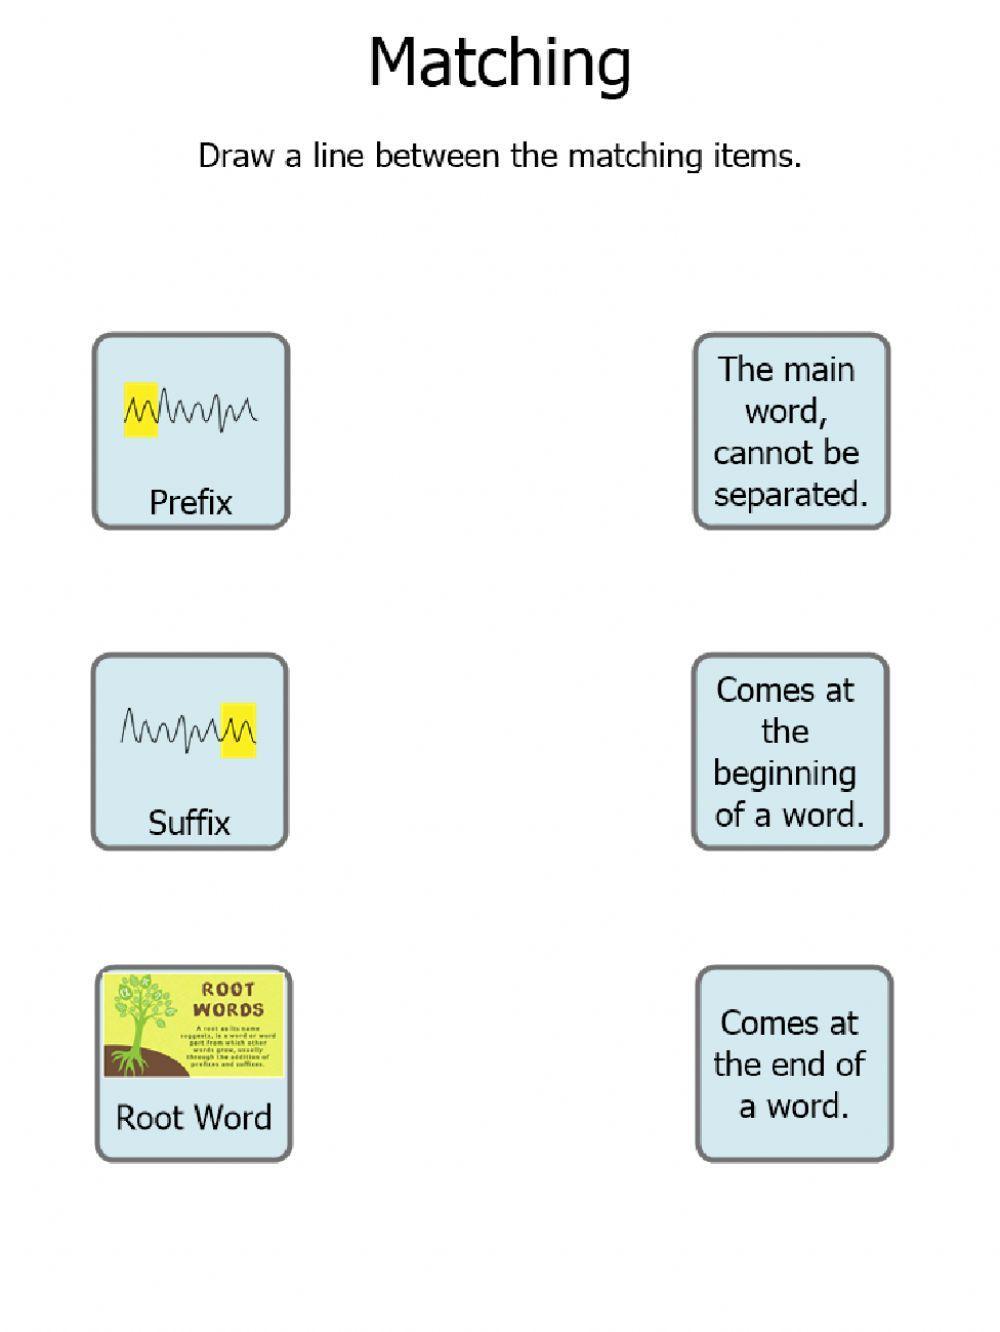 Prefix, Suffix, and Root Word Definition